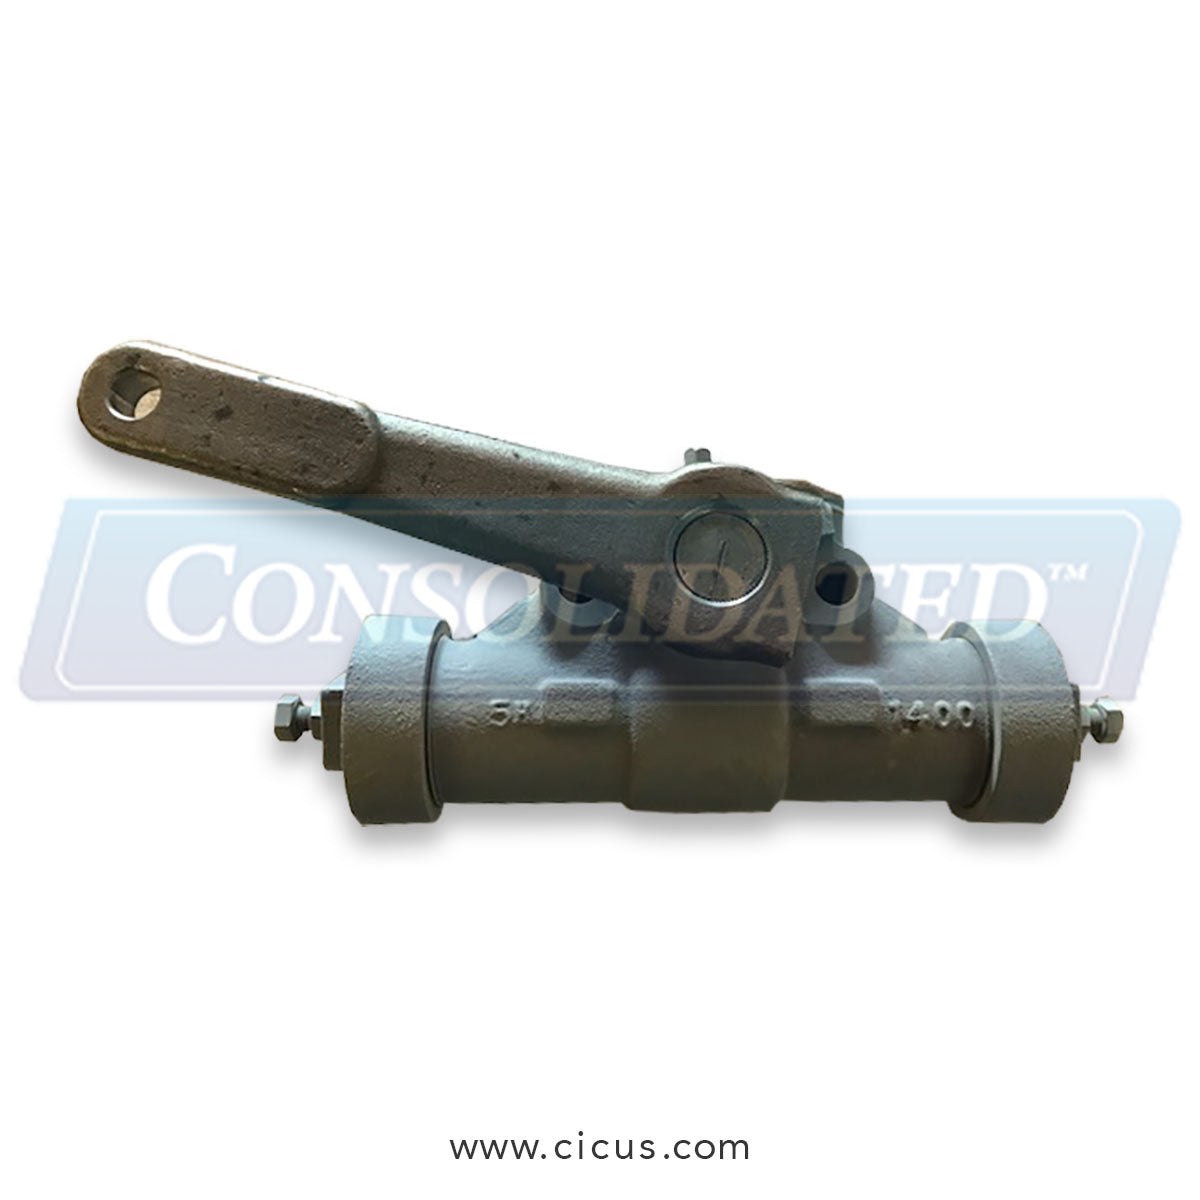 Alliance Laundry Systems Shock Absorber (J0006057)